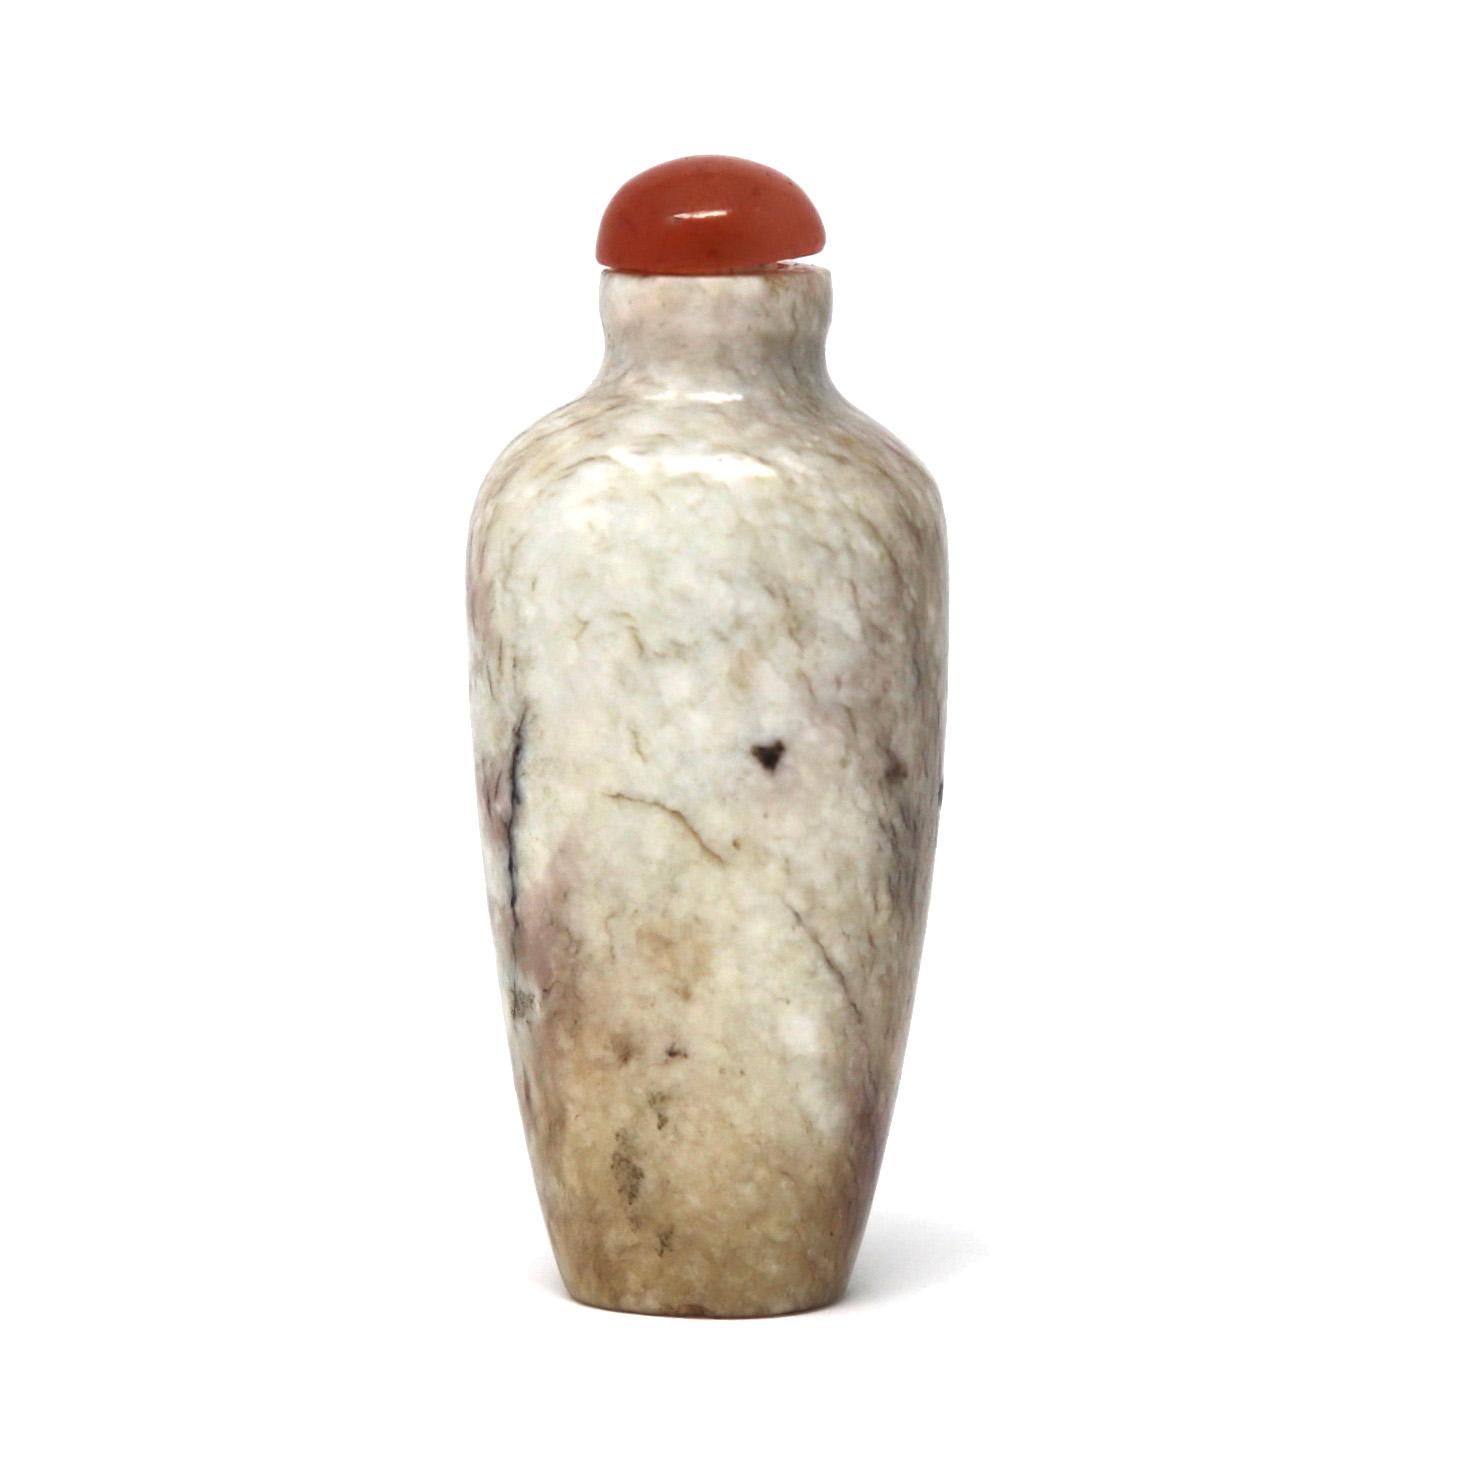 Antique Chinese chicken-bone Jade Snuff bottle, tapered and high shouldered vase form, somewhat flattened with a rounded shoulder, short neck and wider mouth, carved thinly providing for a wider aperture, neatly hollowed, and countersunk base. The